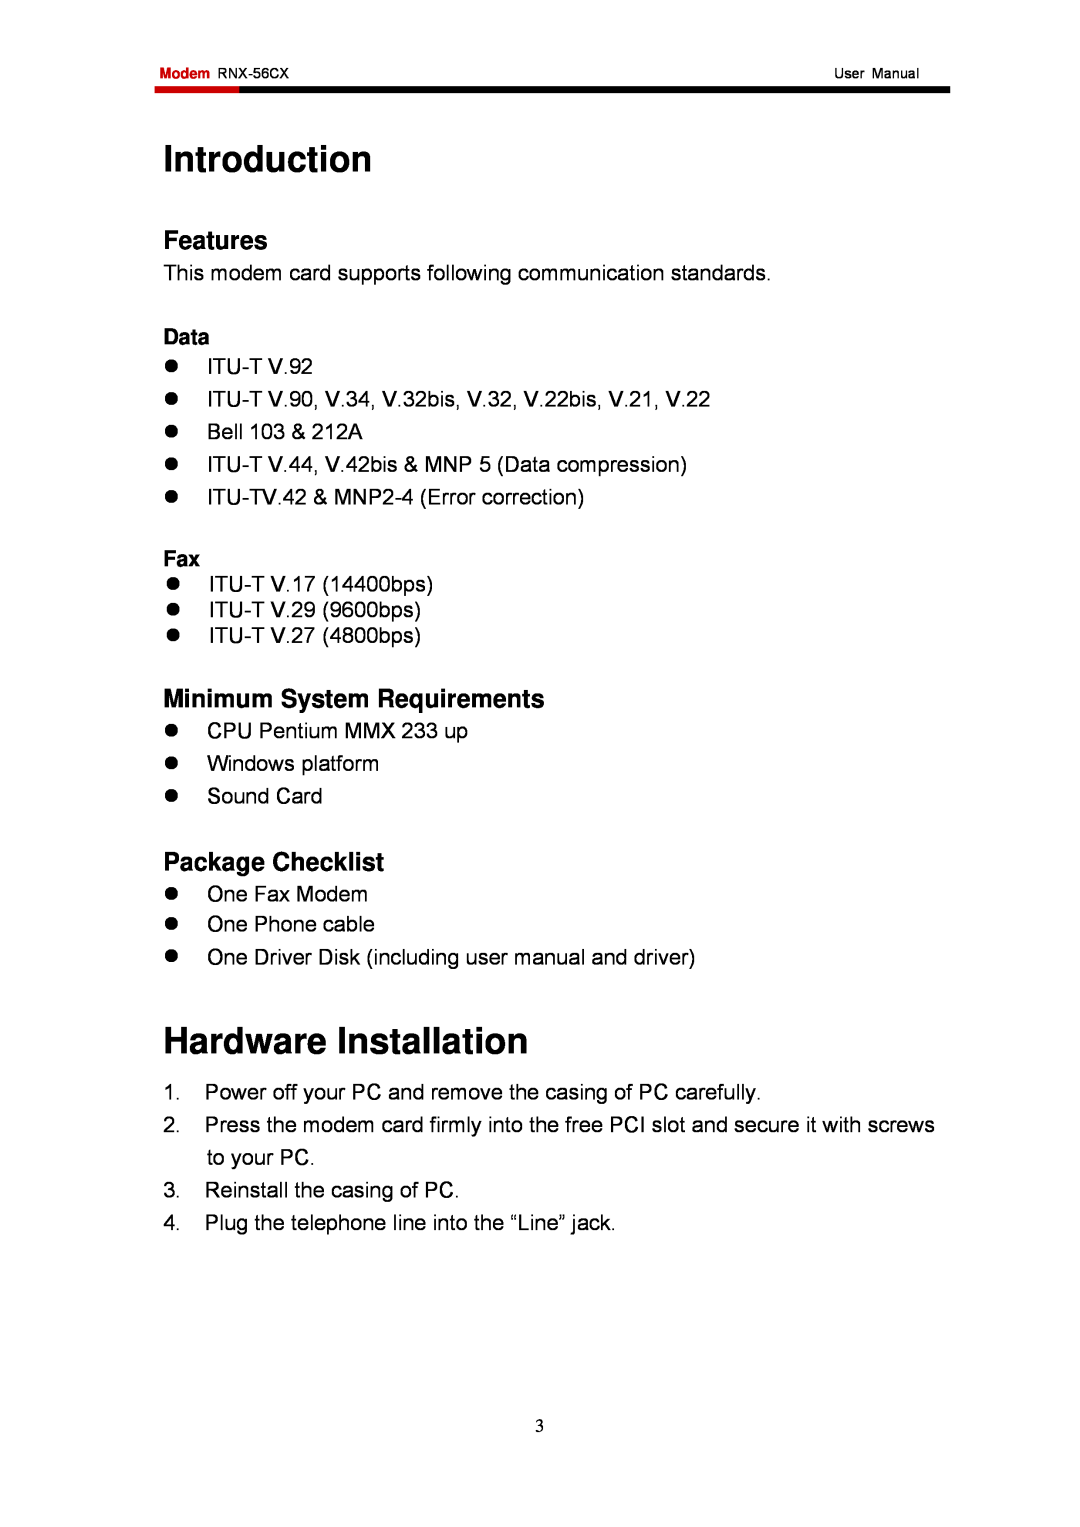 Rosewill RNX-56AG Introduction, Hardware Installation, Features, Minimum System Requirements, Package Checklist, Data 